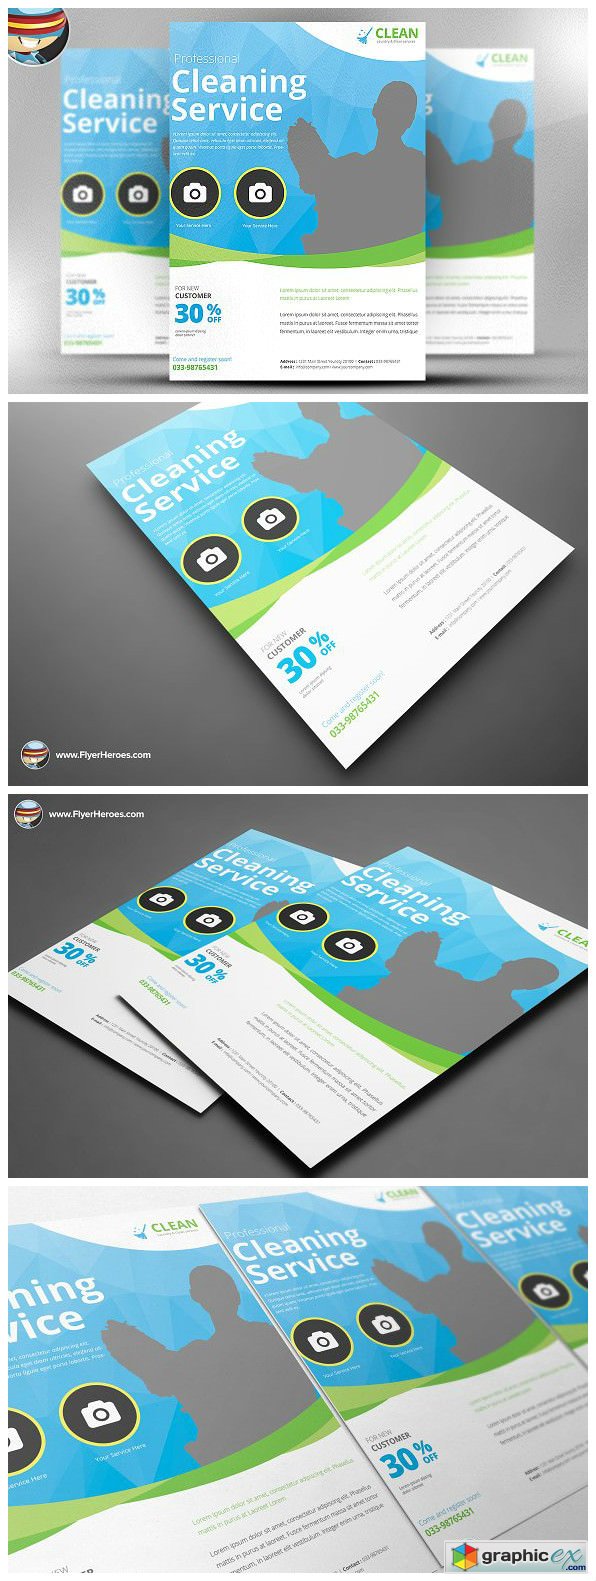 Cleaning Service Flyer Template 2317985